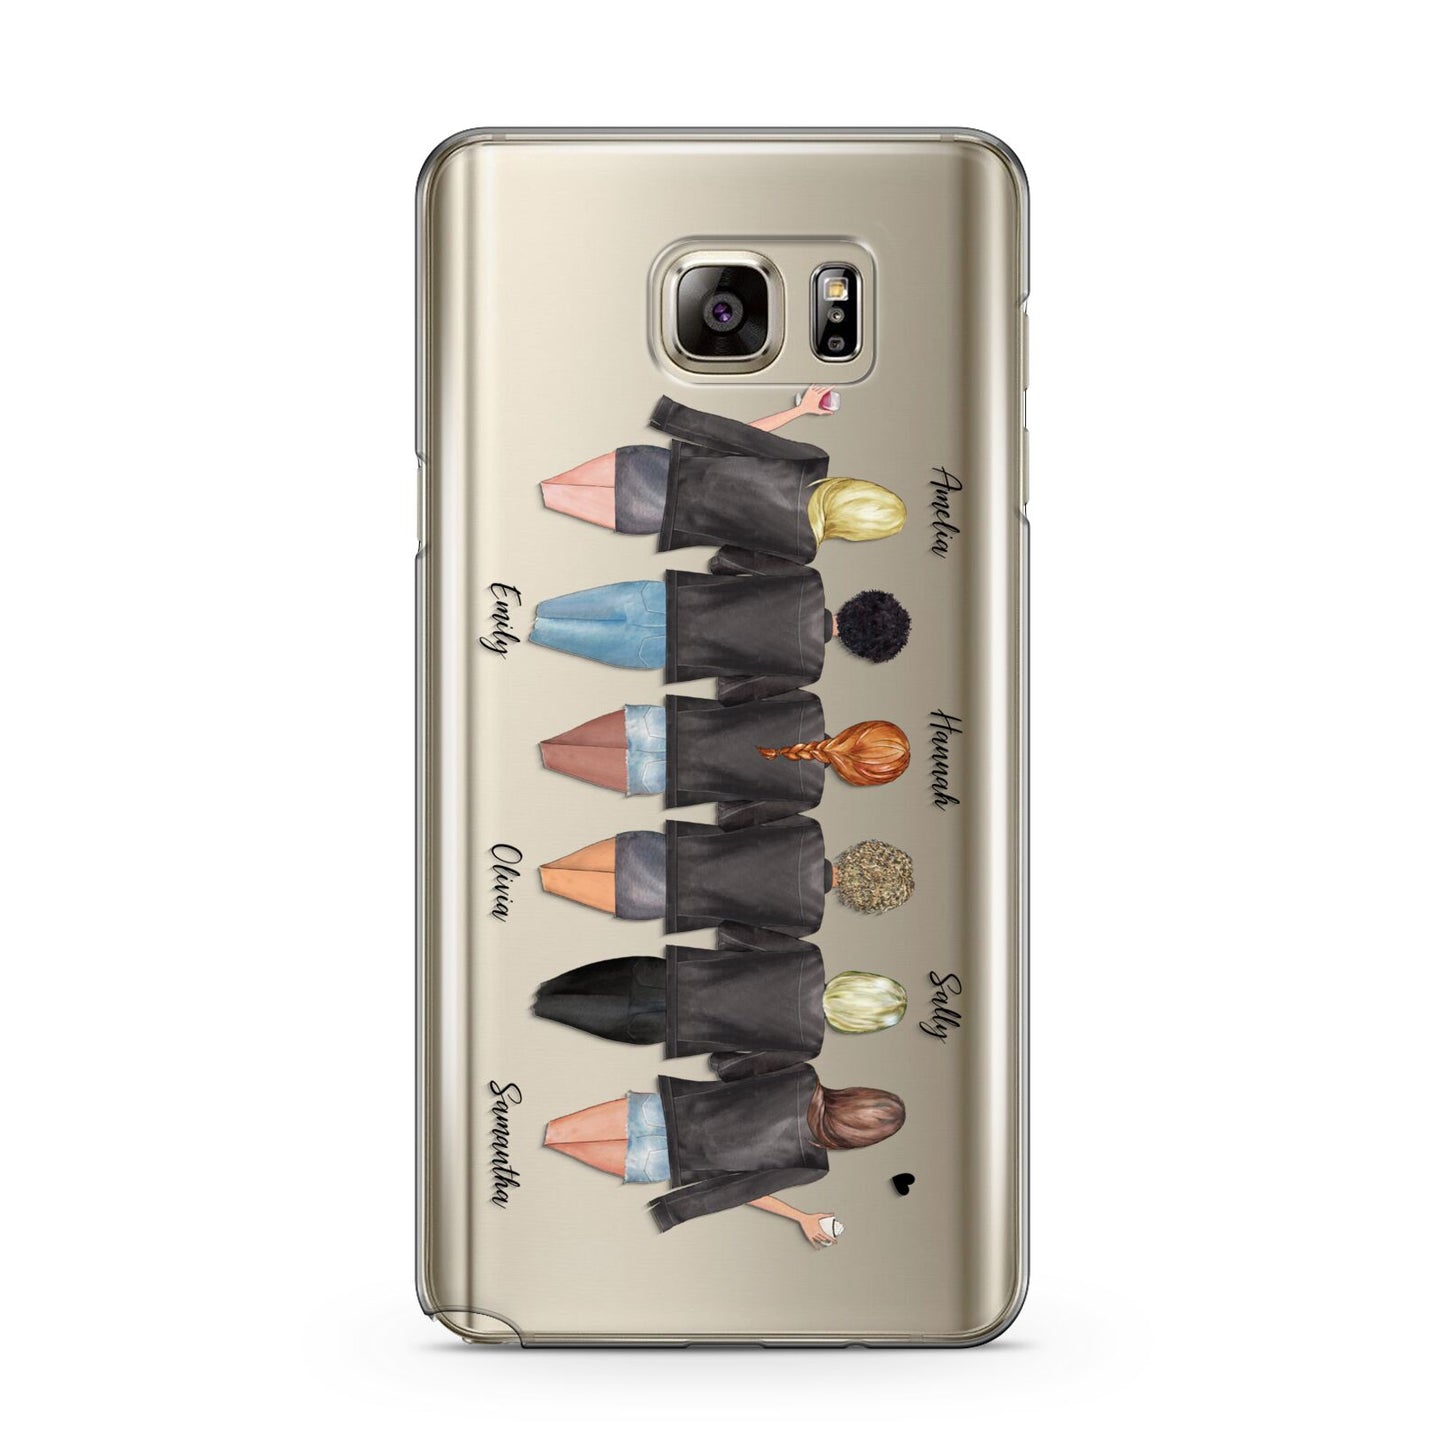 6 Best Friends with Names Samsung Galaxy Note 5 Case